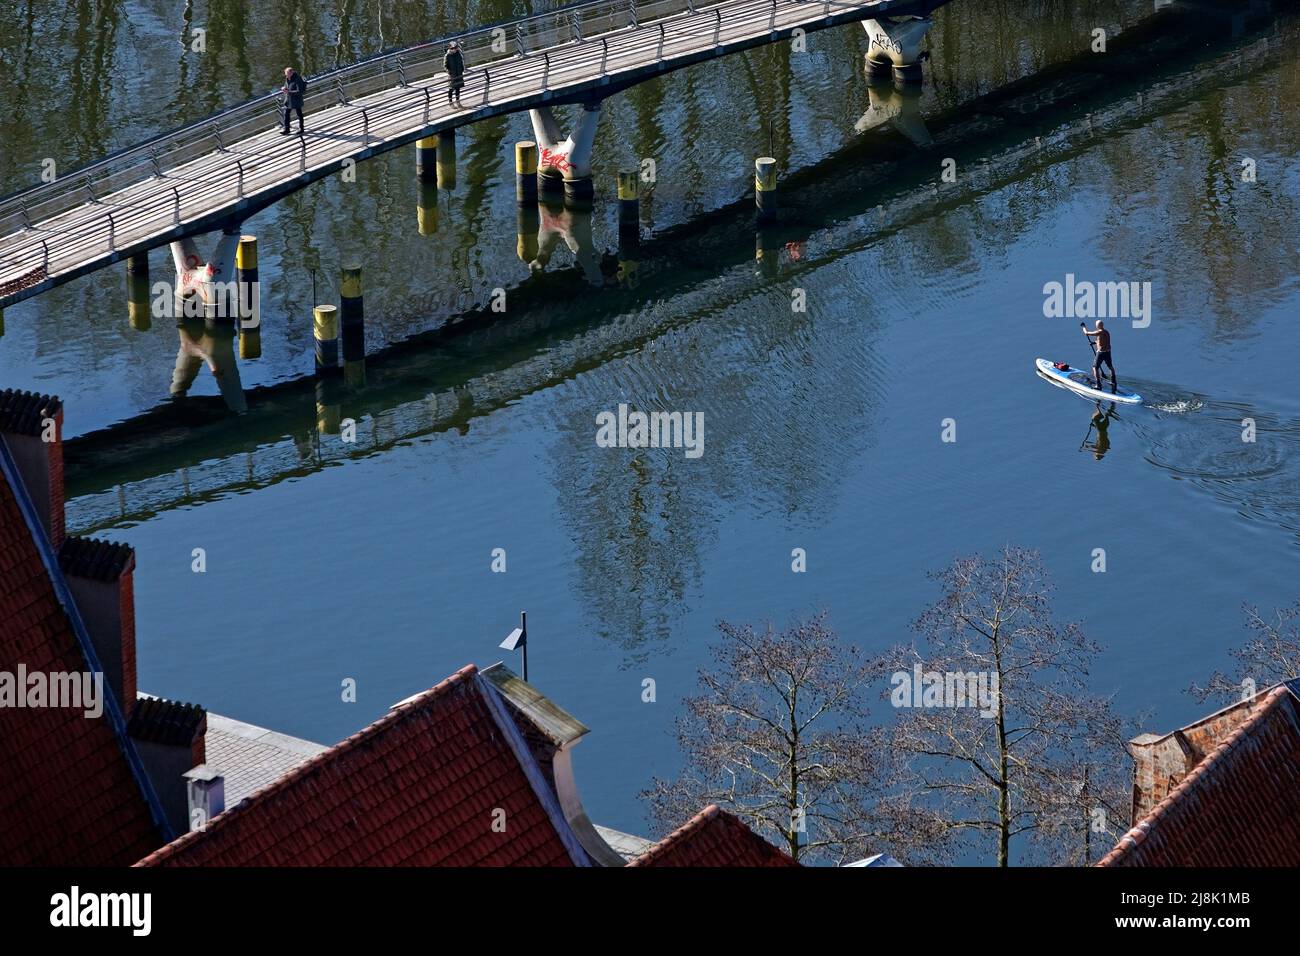 Stand-up paddler on river Trave from bird's eye view, Germany, Schleswig-Holstein, Luebeck Stock Photo